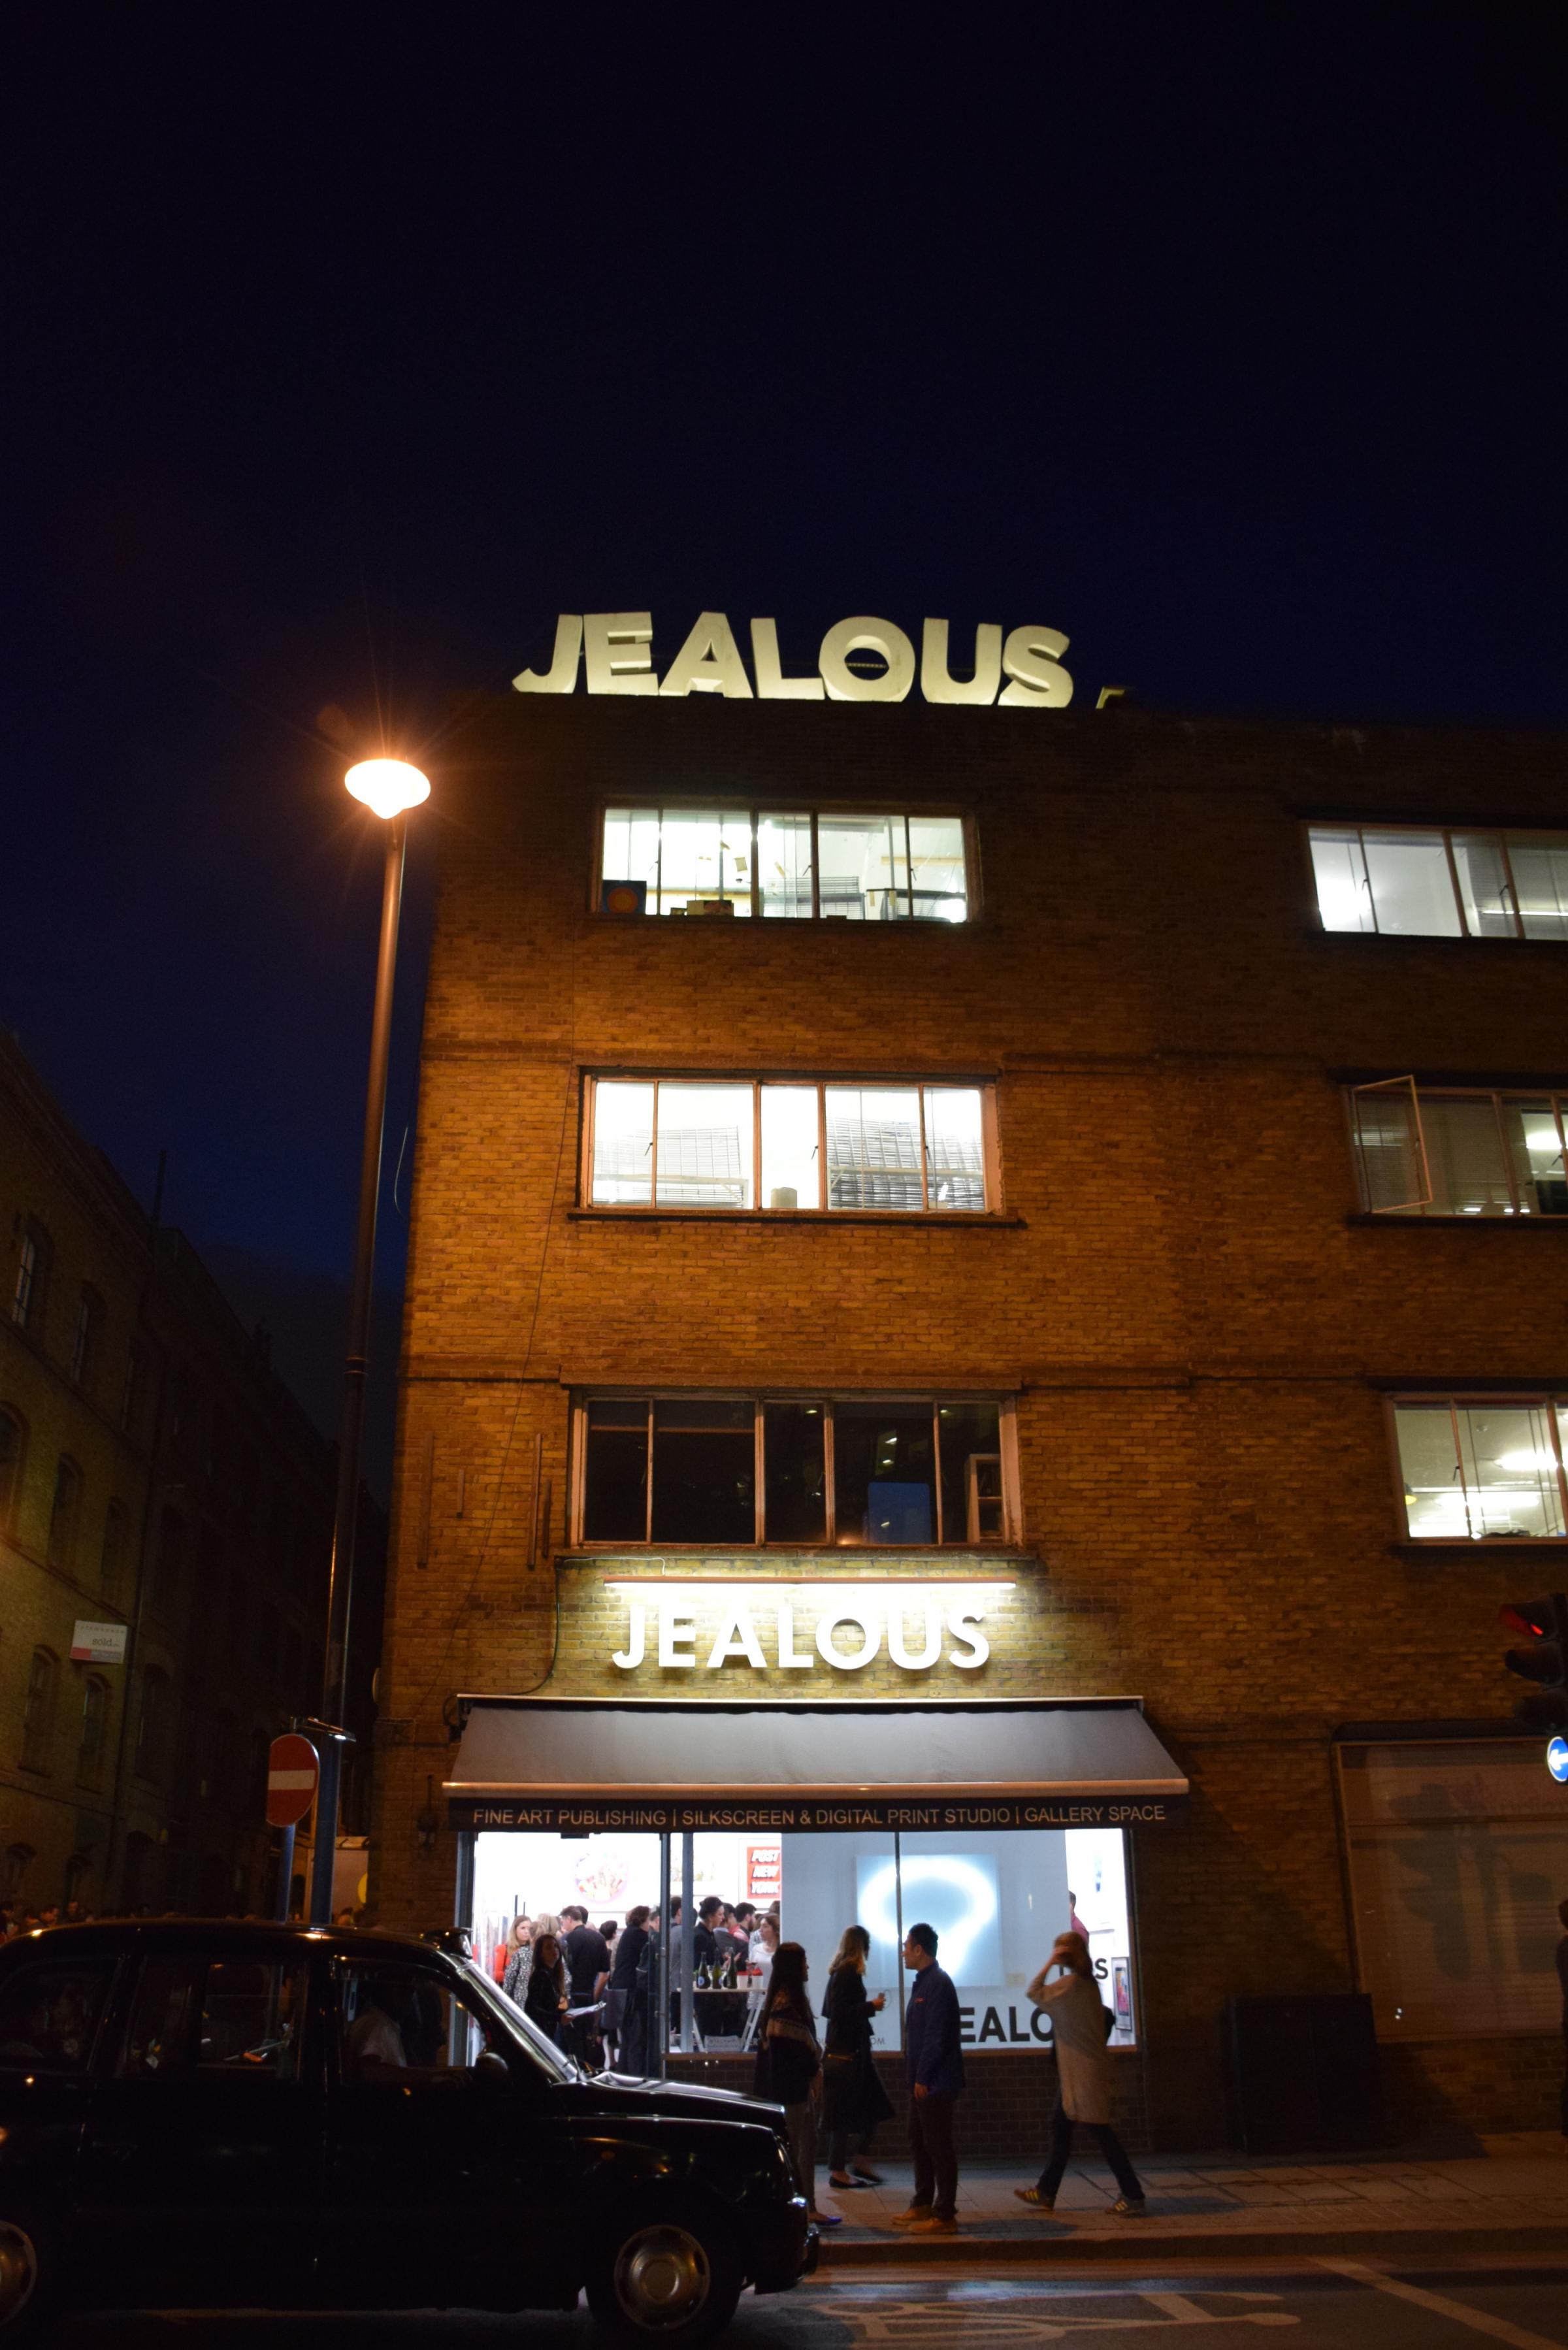 The Jealous gallery sign photographed in October 2014 Photo: Jealous Gallery